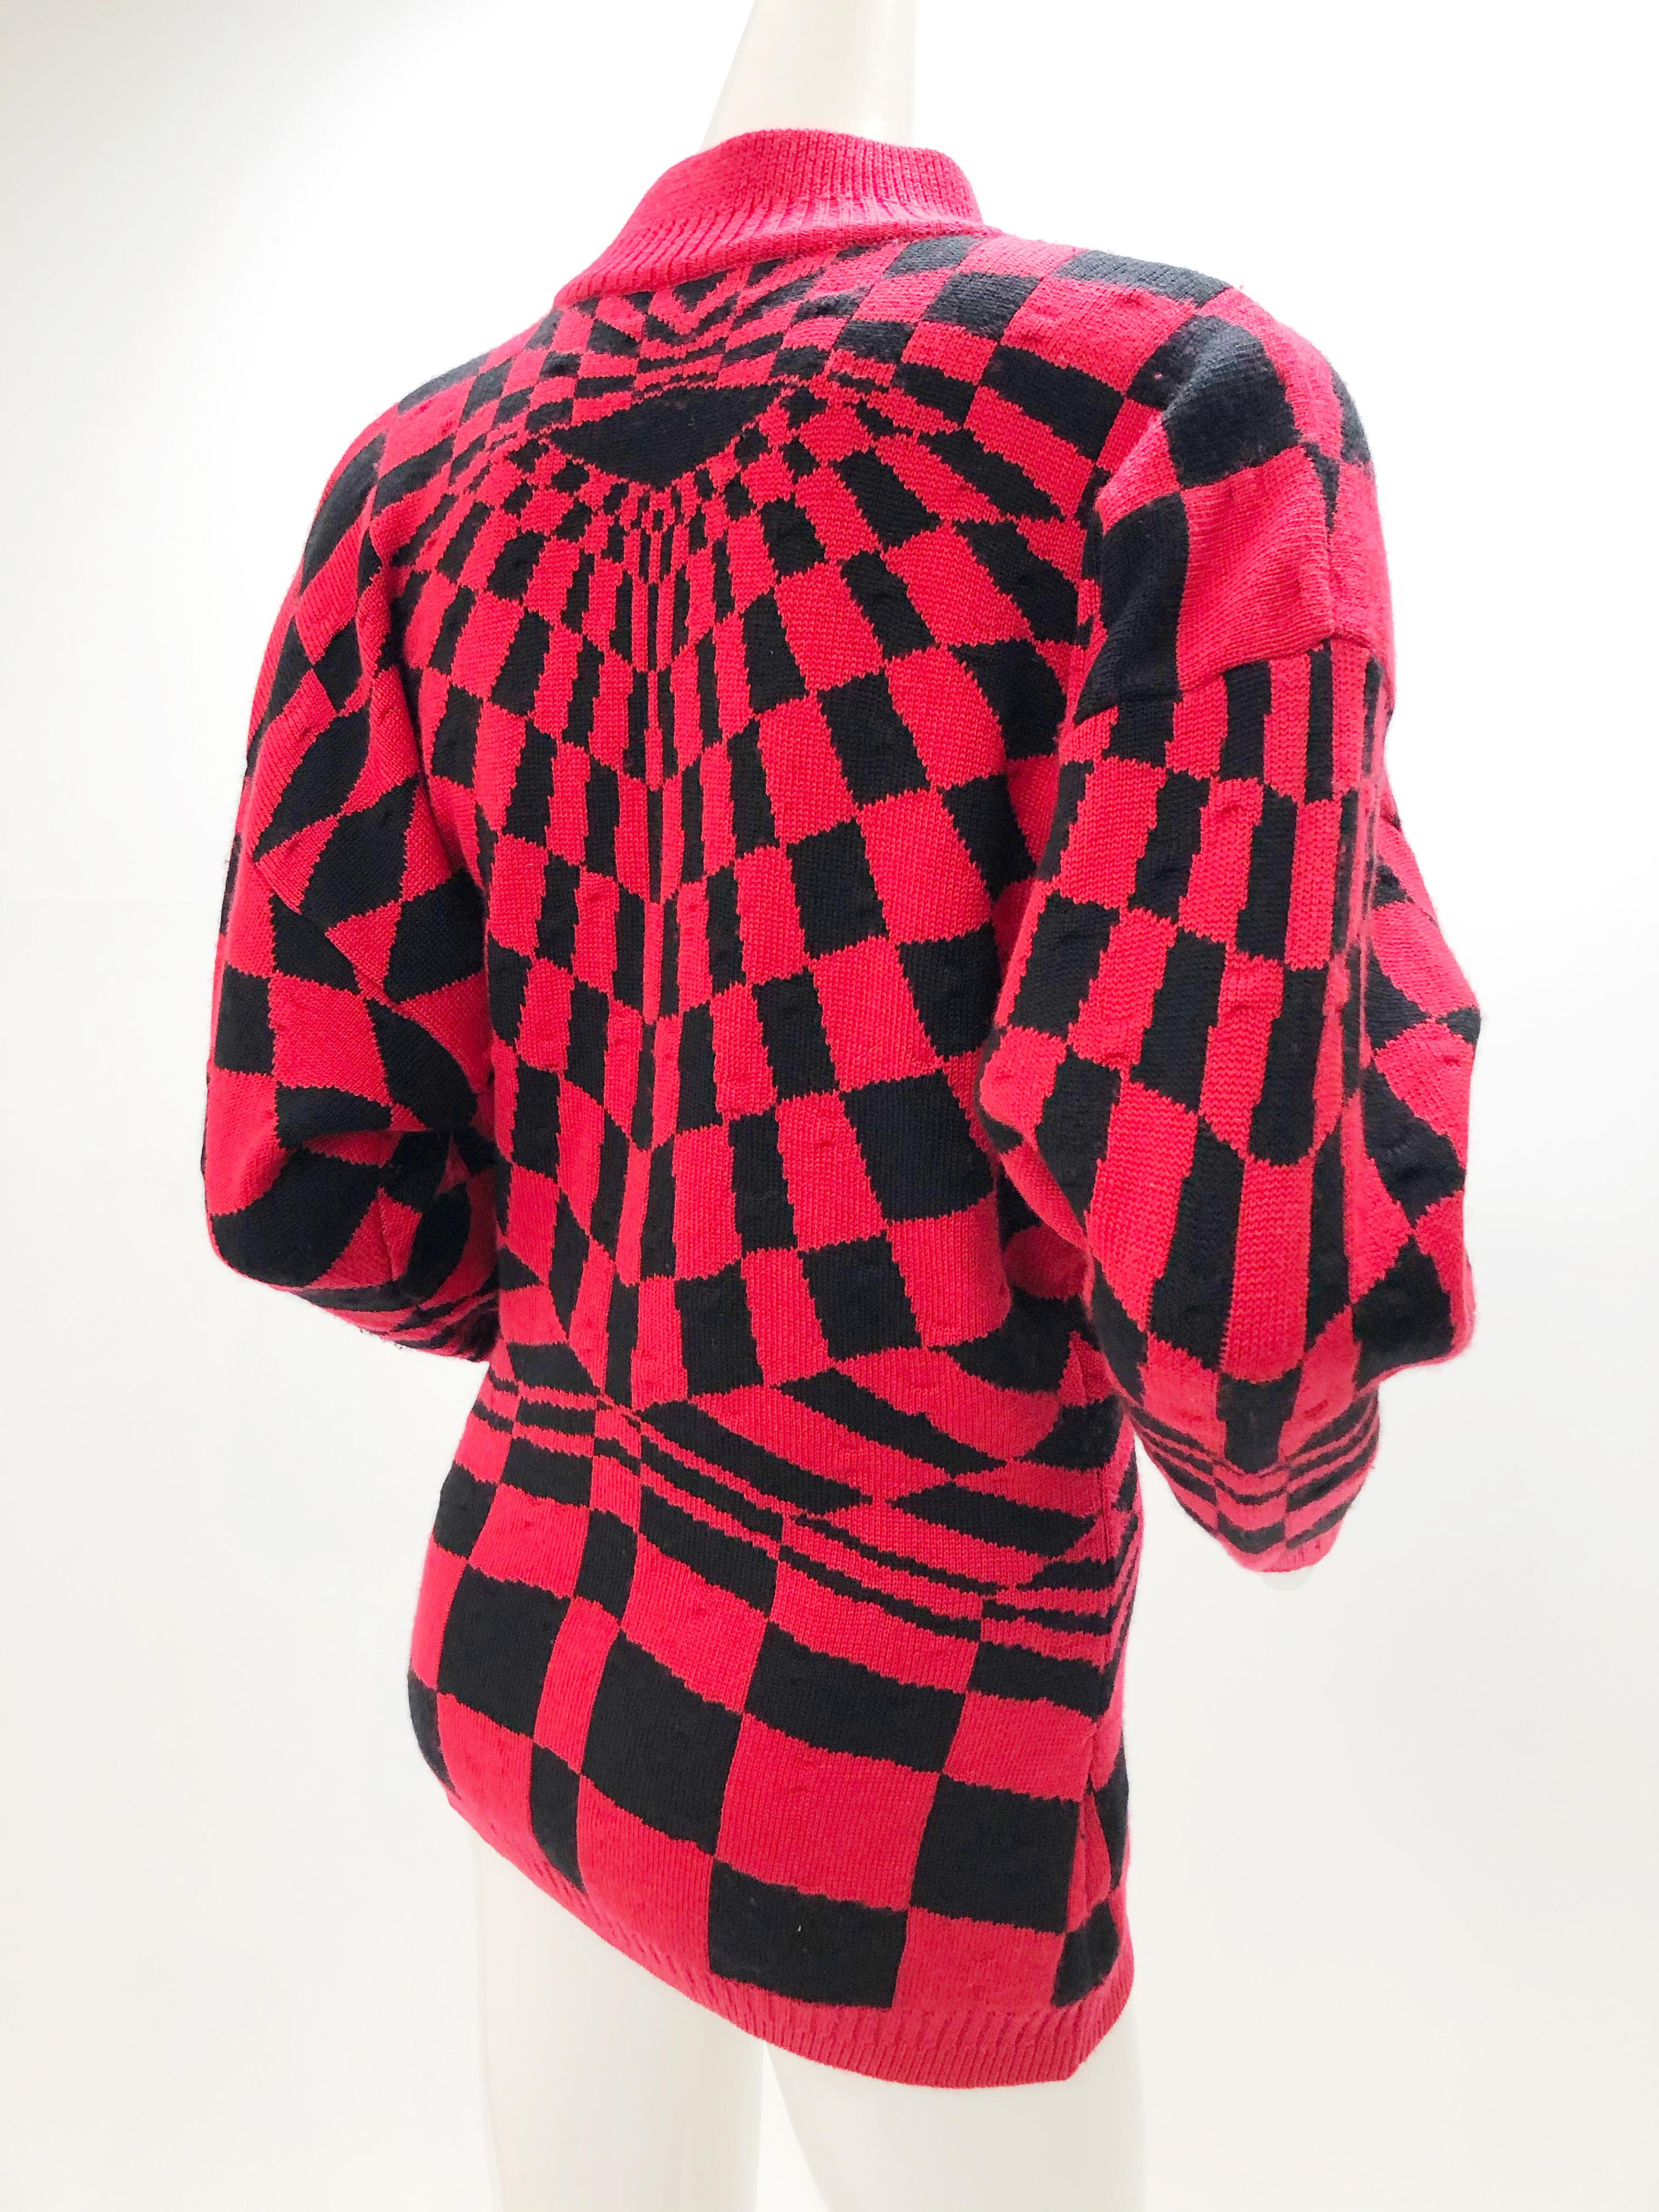 Women's 1980s Gianni Versace 3-Piece Knit Skirt Sweater & Scarf in Mod Red Checkerboard